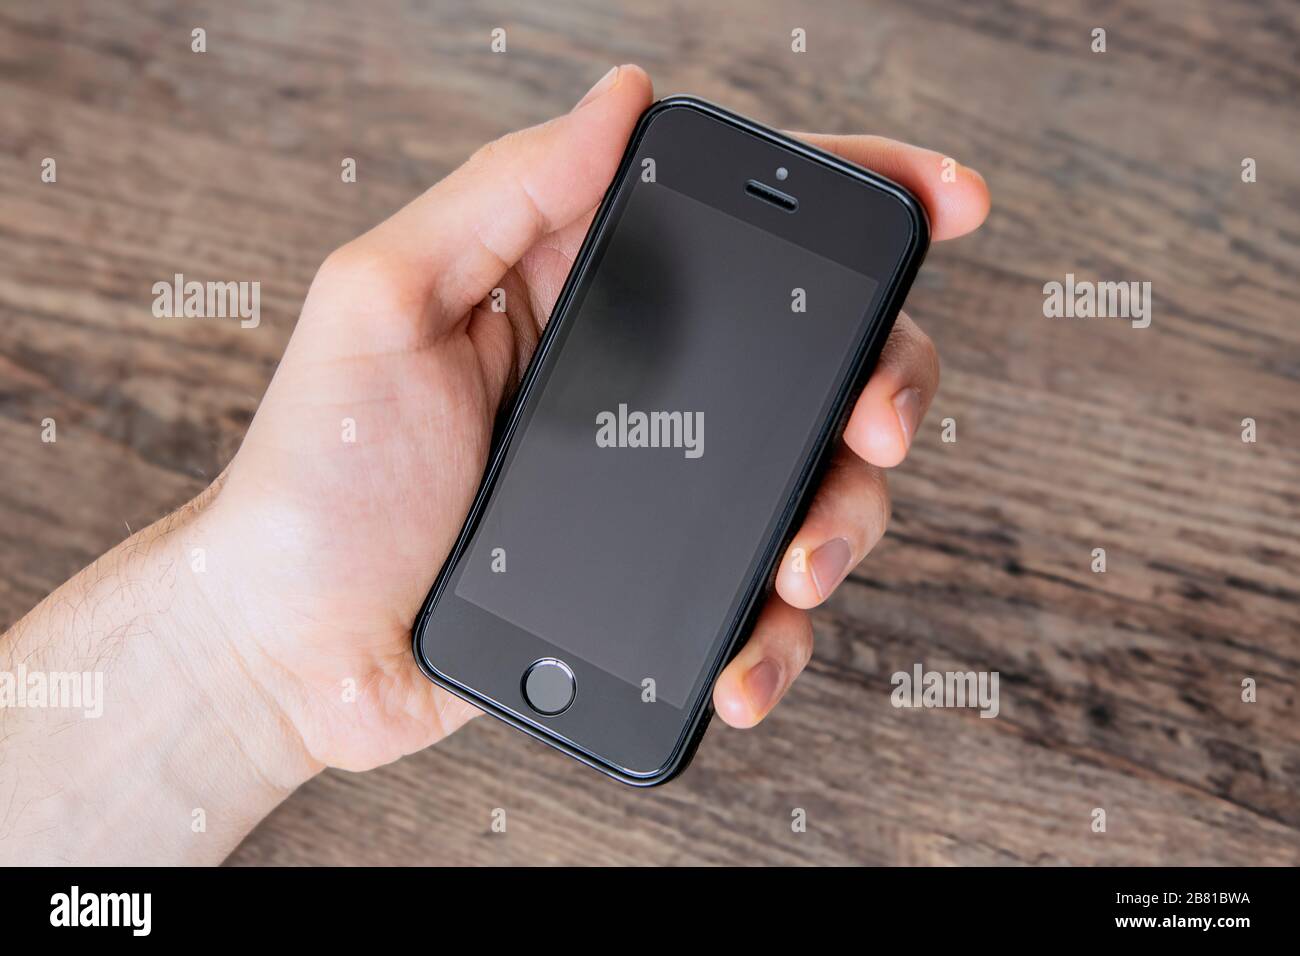 Man holding black blank phone with his left hand, close up, neutral background, view from above. Communication concept. Stock Photo